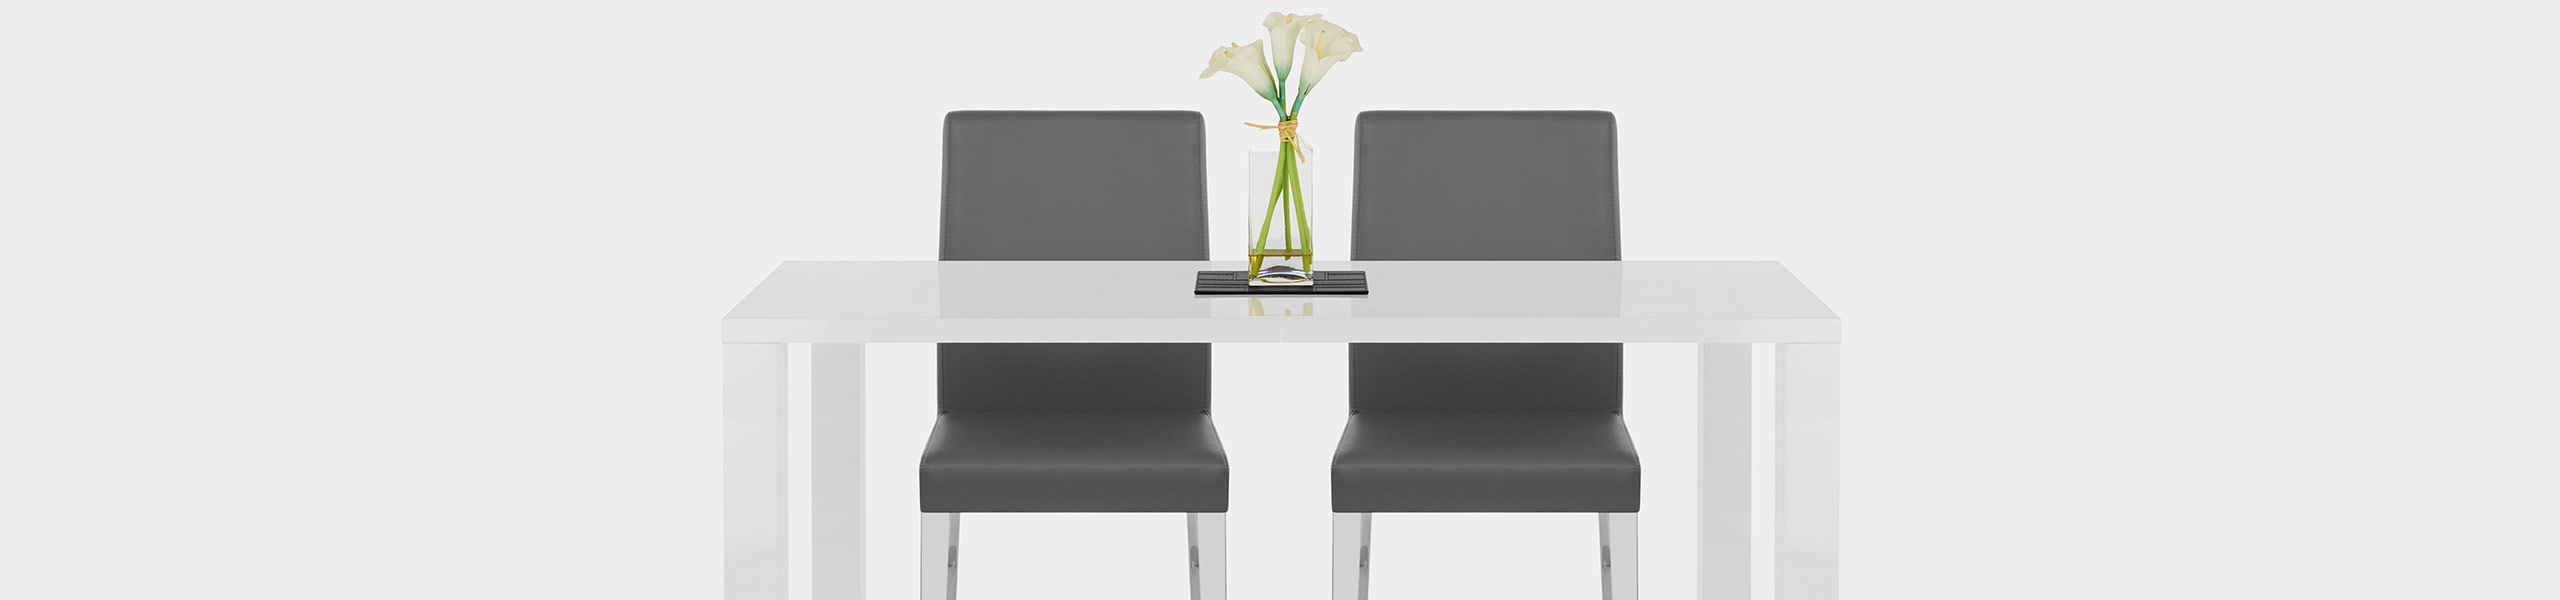 Dash Dining Chair Grey Video Banner